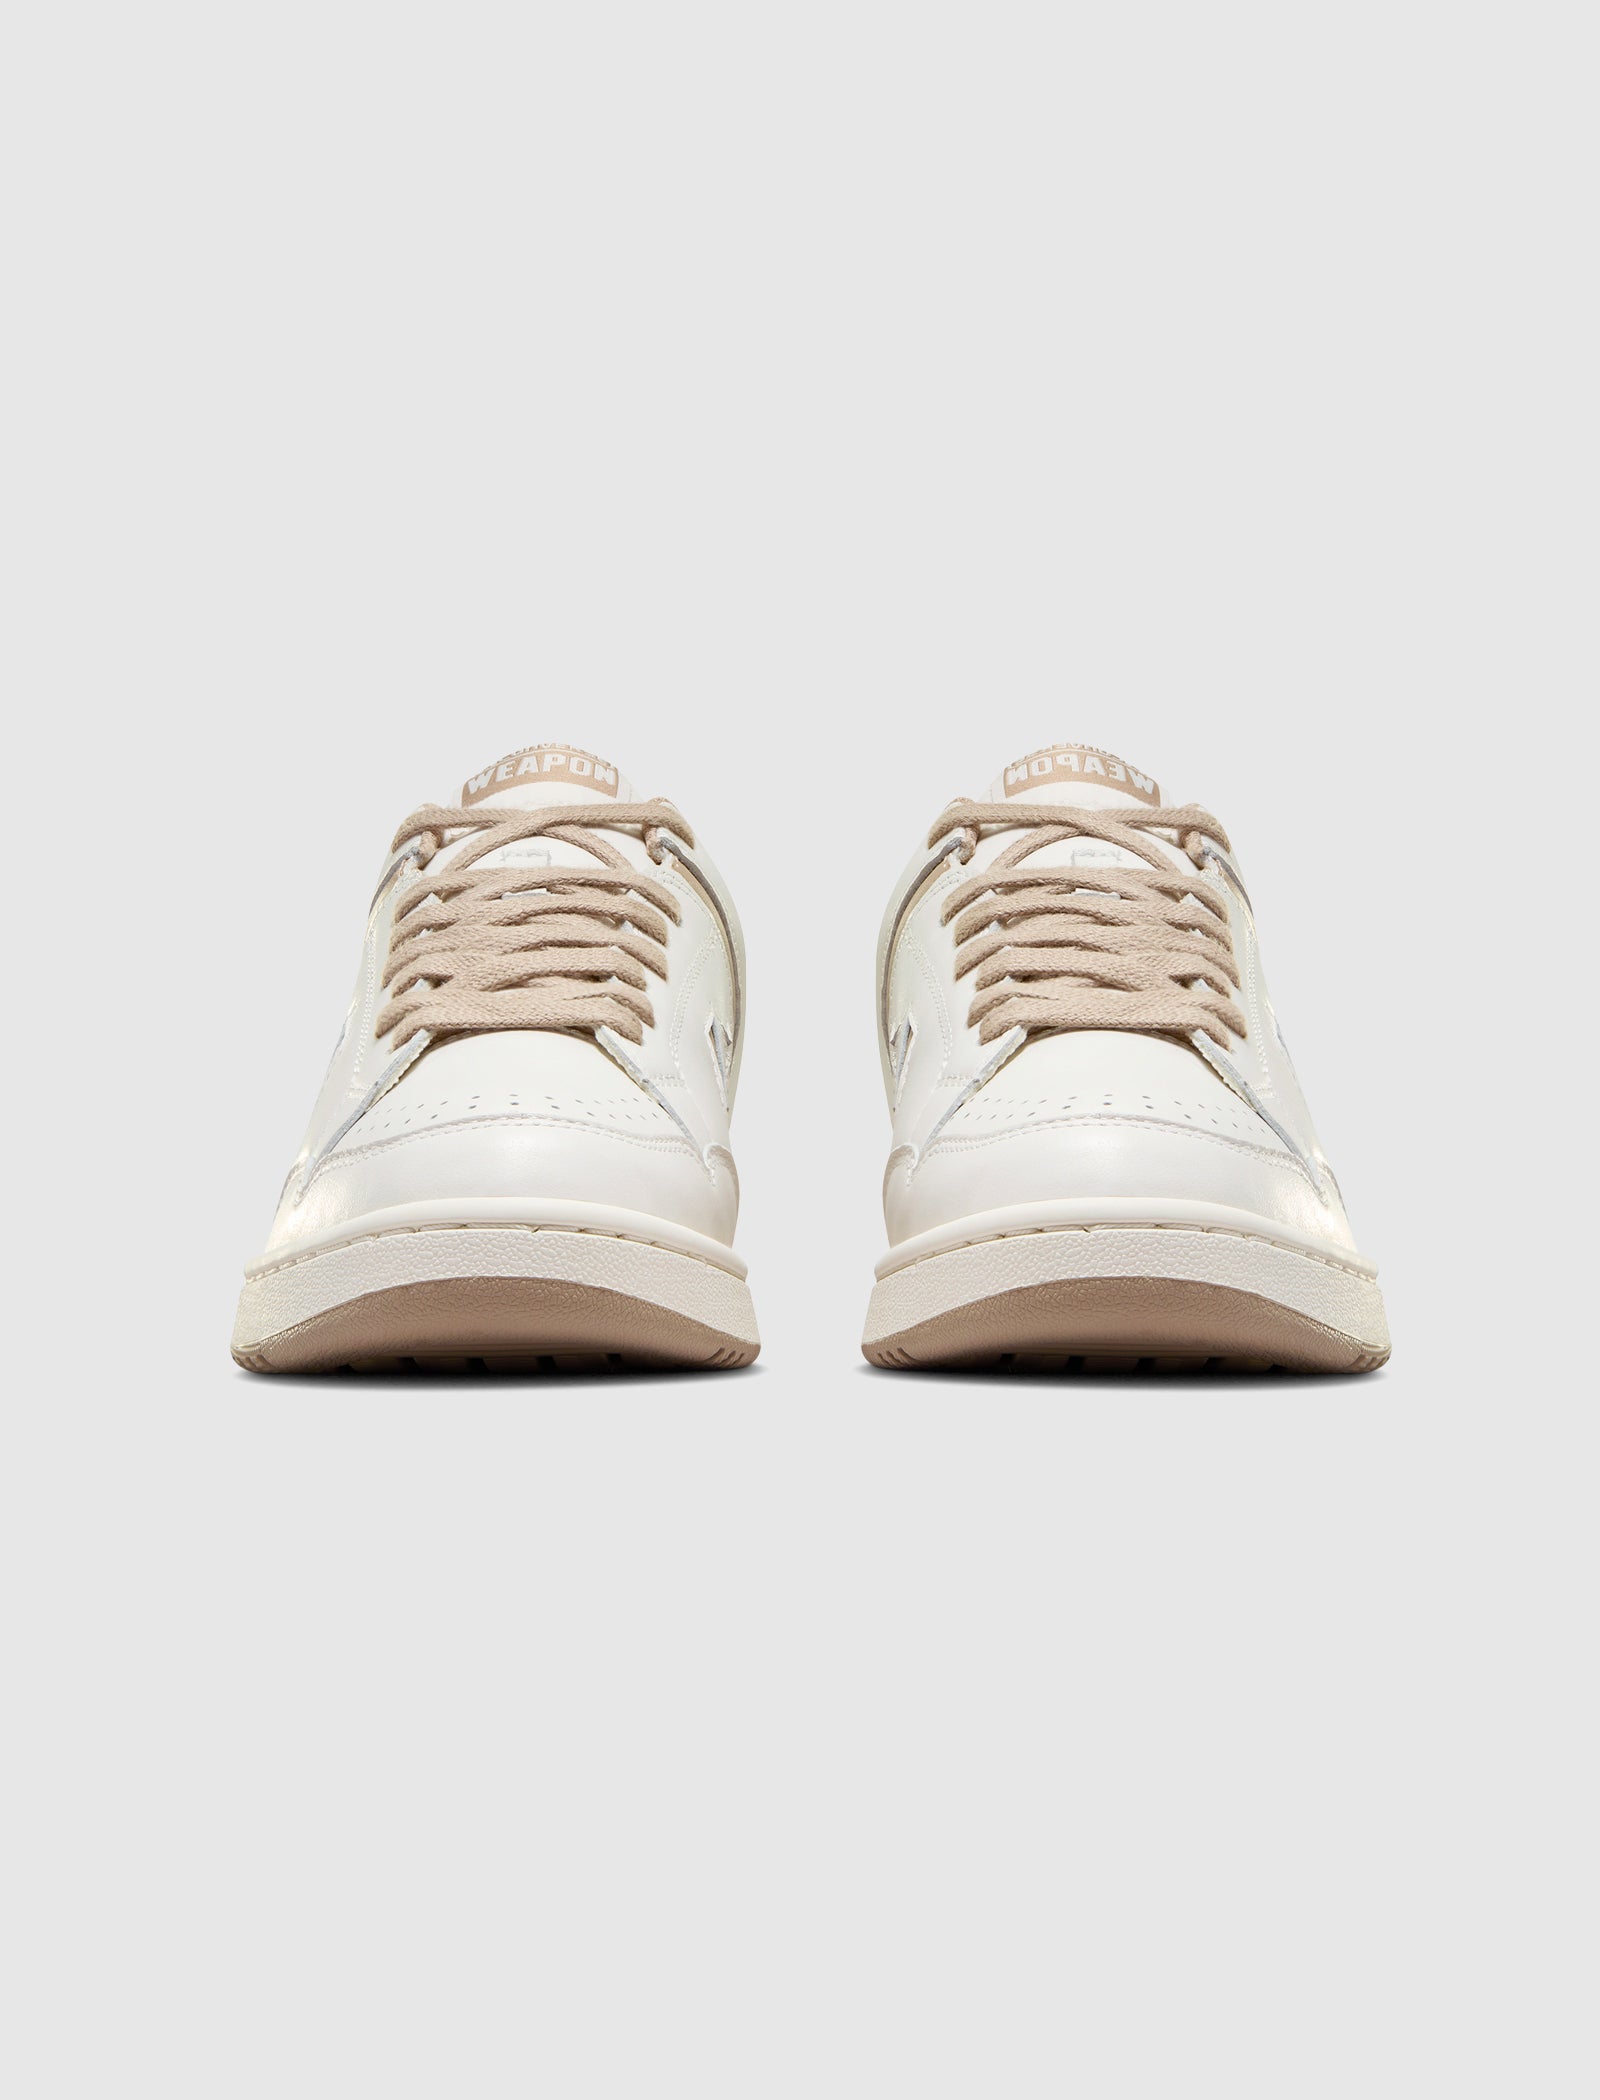 WEAPON OX "NATURAL IVORY/VINTAGE CARGO"